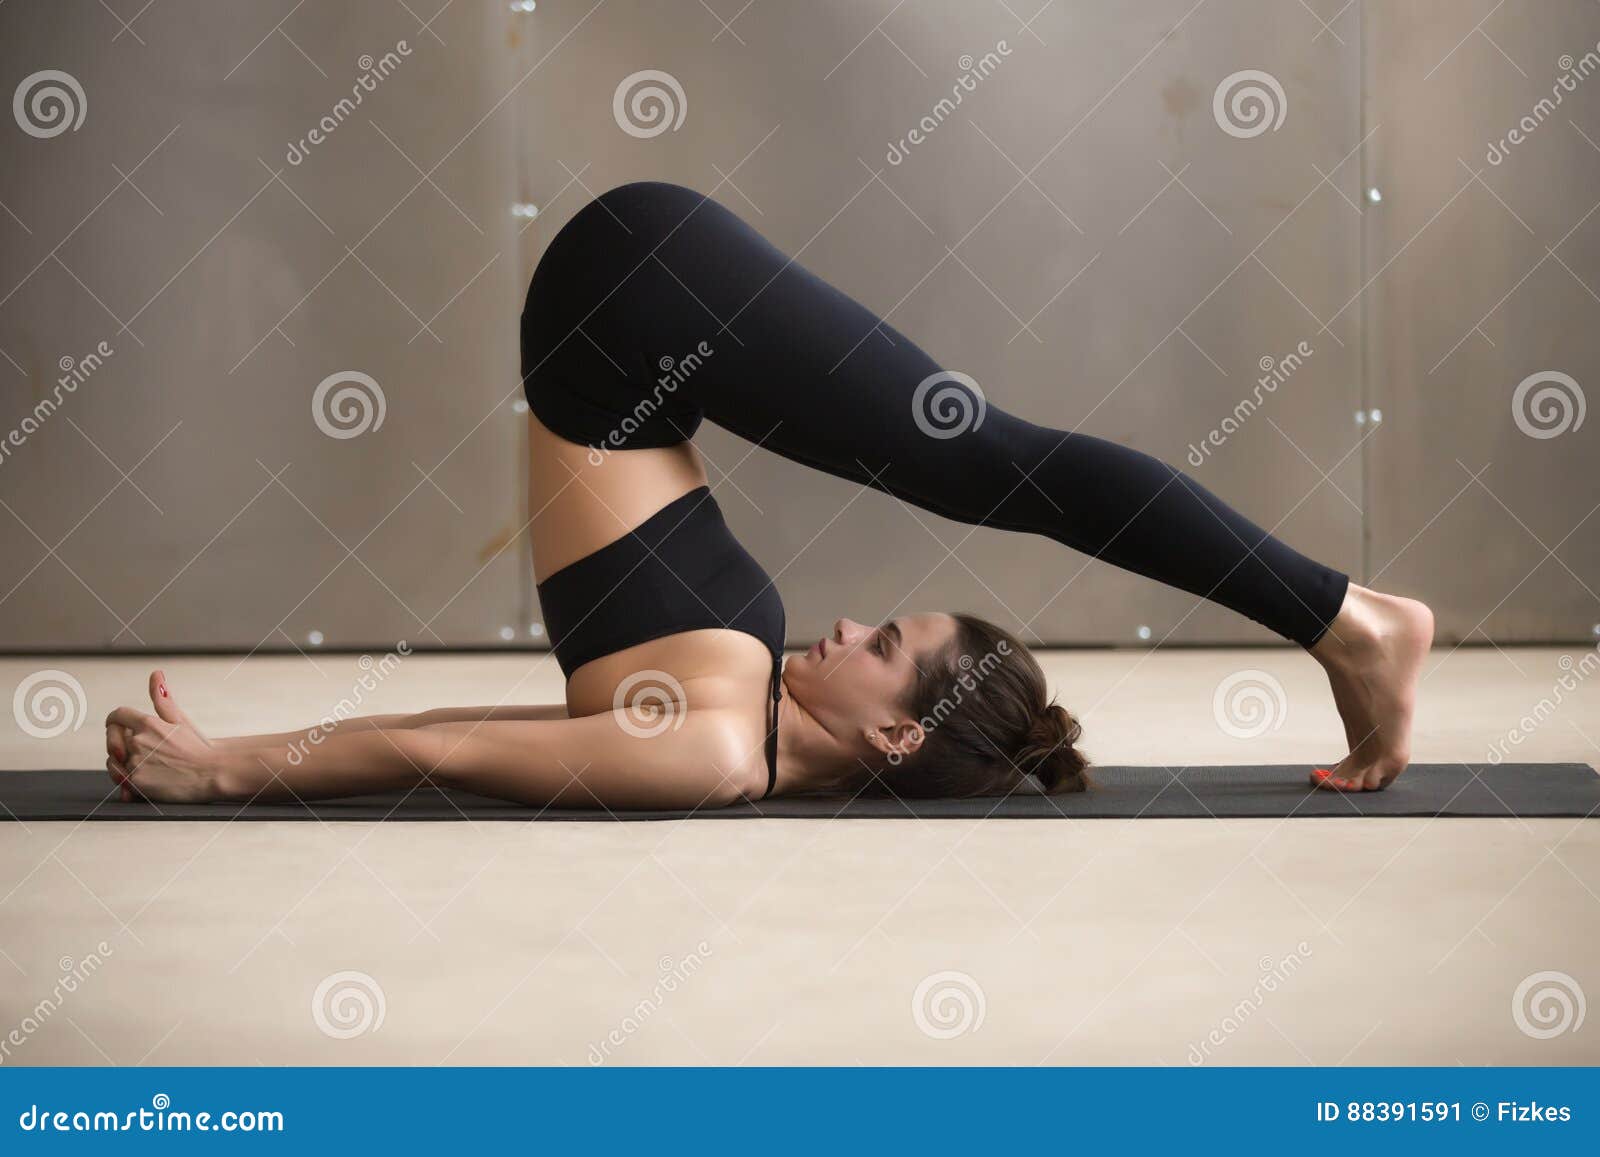 young attractive woman stretching in halasana pose, grey studio